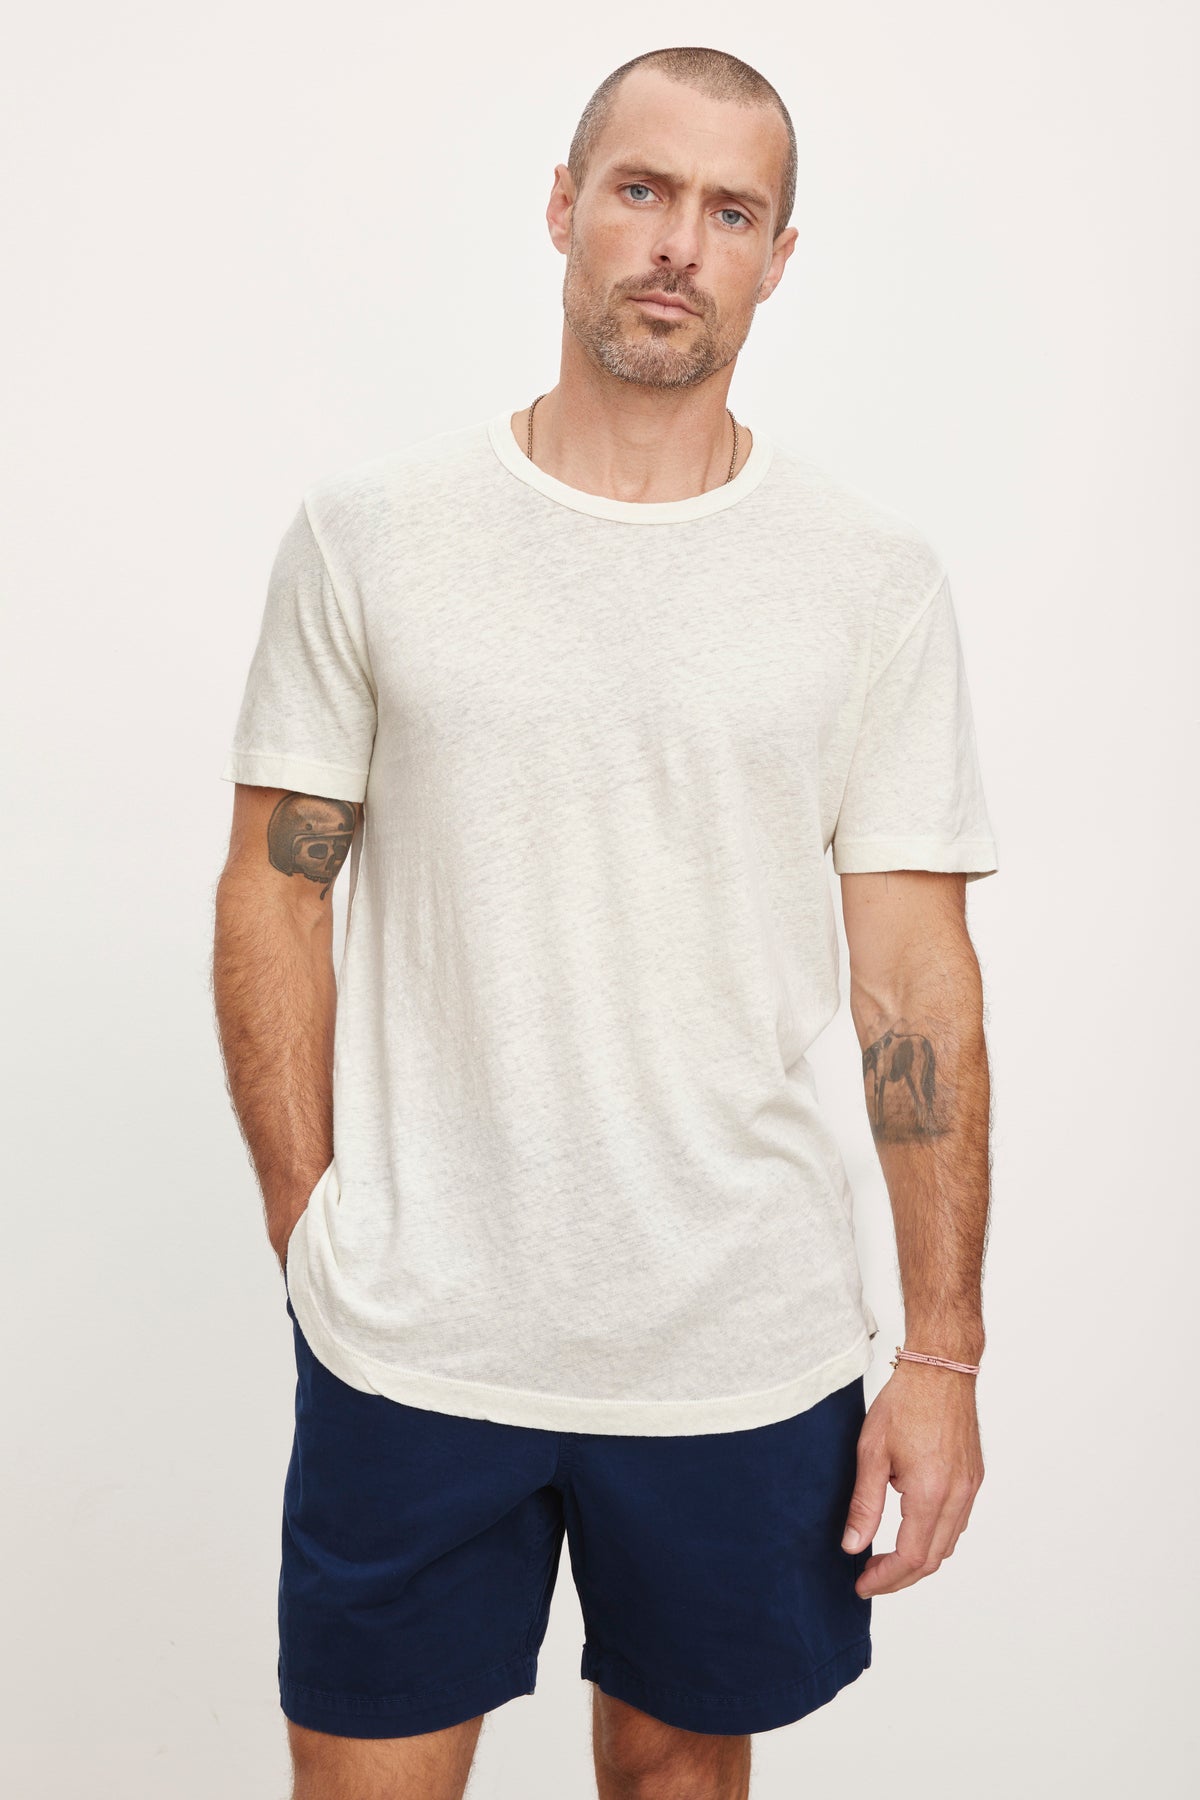   A man with a beard and tattoos stands against a white background, wearing a Velvet by Graham & Spencer Davey Tee in light gray and navy shorts. 